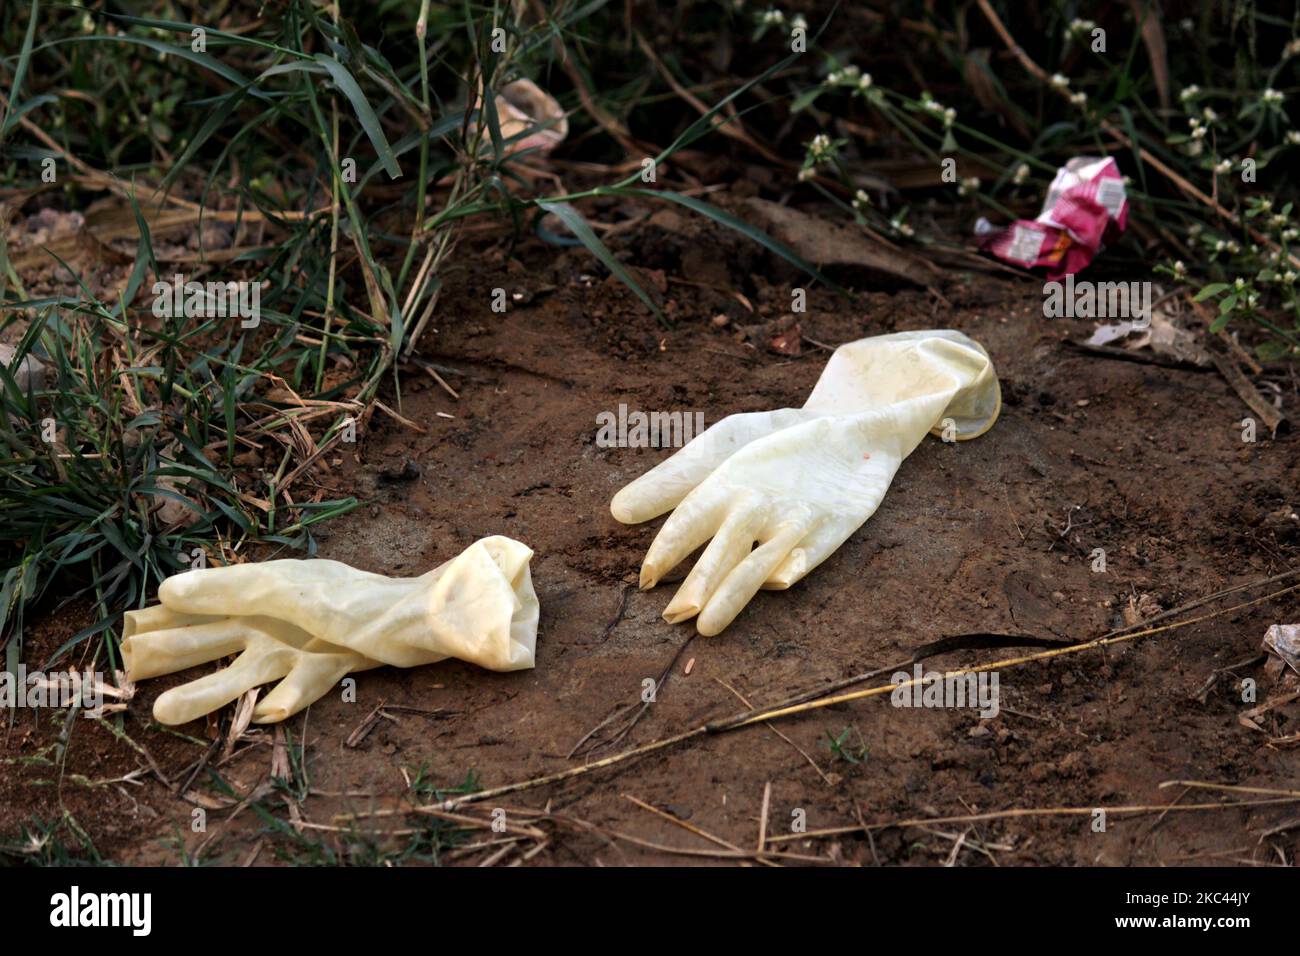 Discarded personal protective equipment's such as masks, gloves and kits are seen scattered all over the graveyard, at Jadid Qabristan Ahle - Islam graveyard, on November 12, 2020 in New Delhi. India has reported 48,285 fresh Covid-19 cases in the past 24 hours. The total caseload now stands at 8,684,039. The country's death toll has mounted to 128,164. (Photo by Mayank Makhija/NurPhoto) Stock Photo